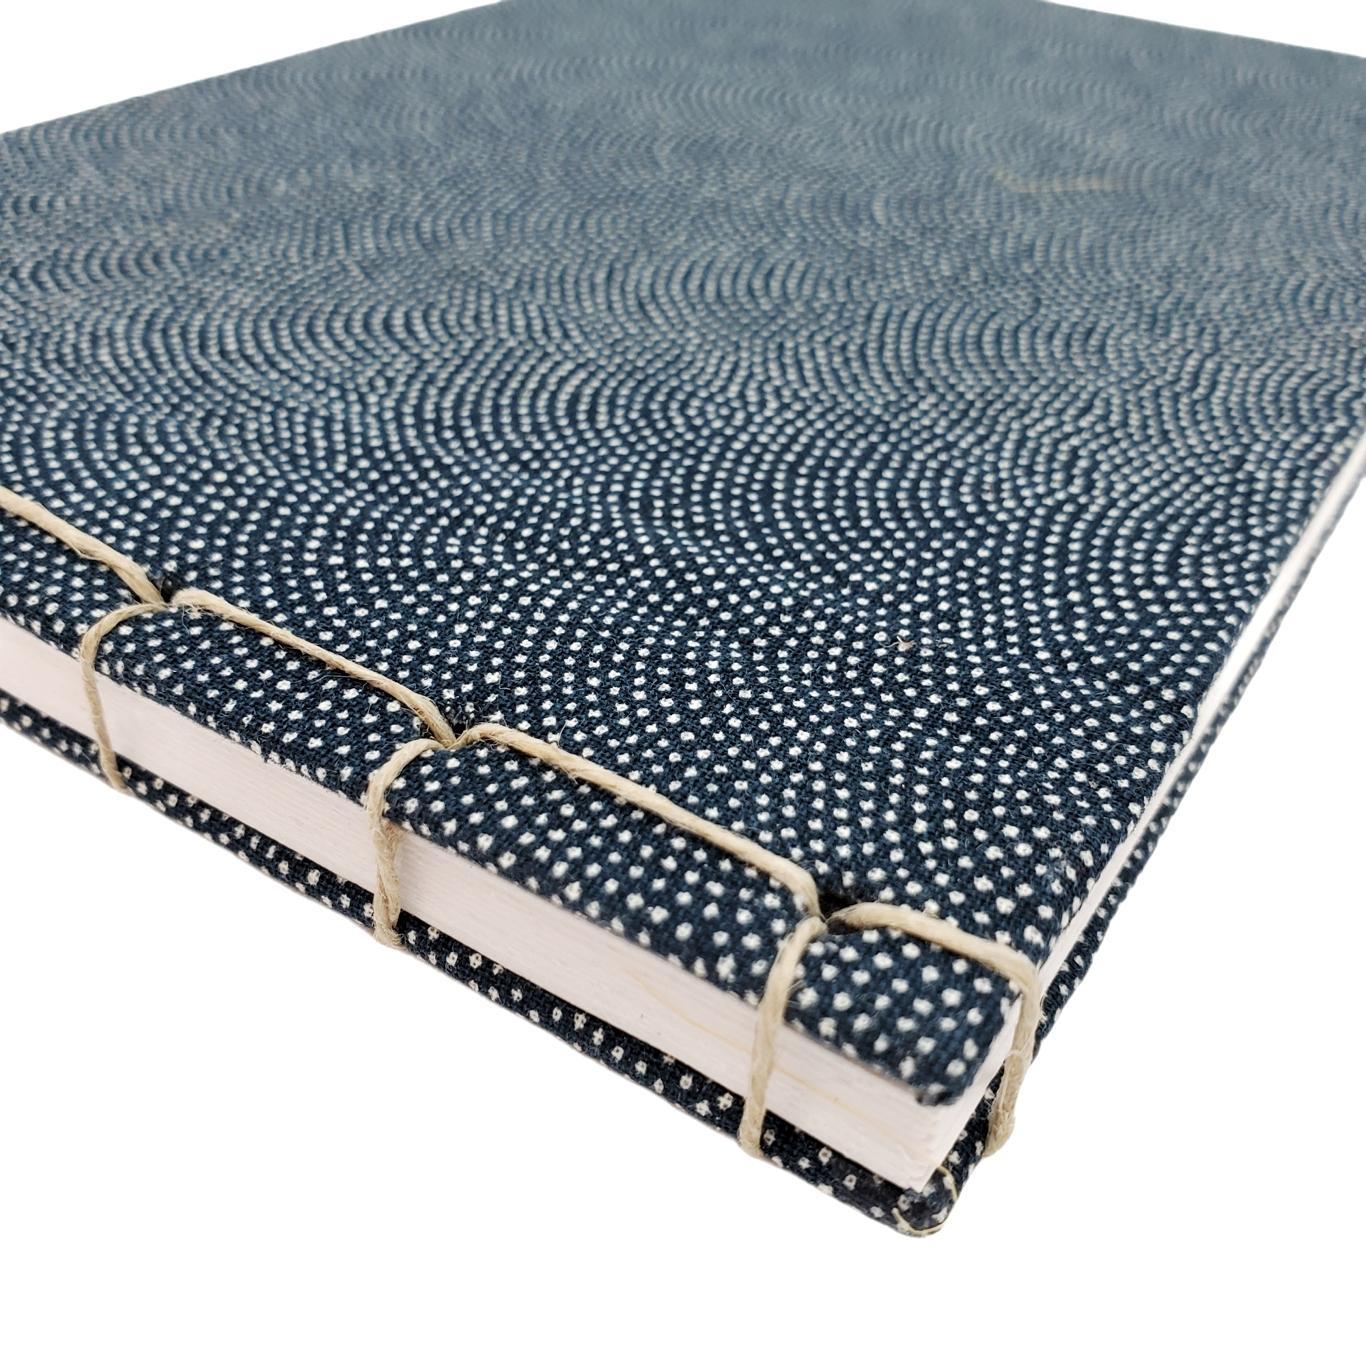 Journal - Clamshell Fabric Hand-bound Hardcover by Studio Artisaan